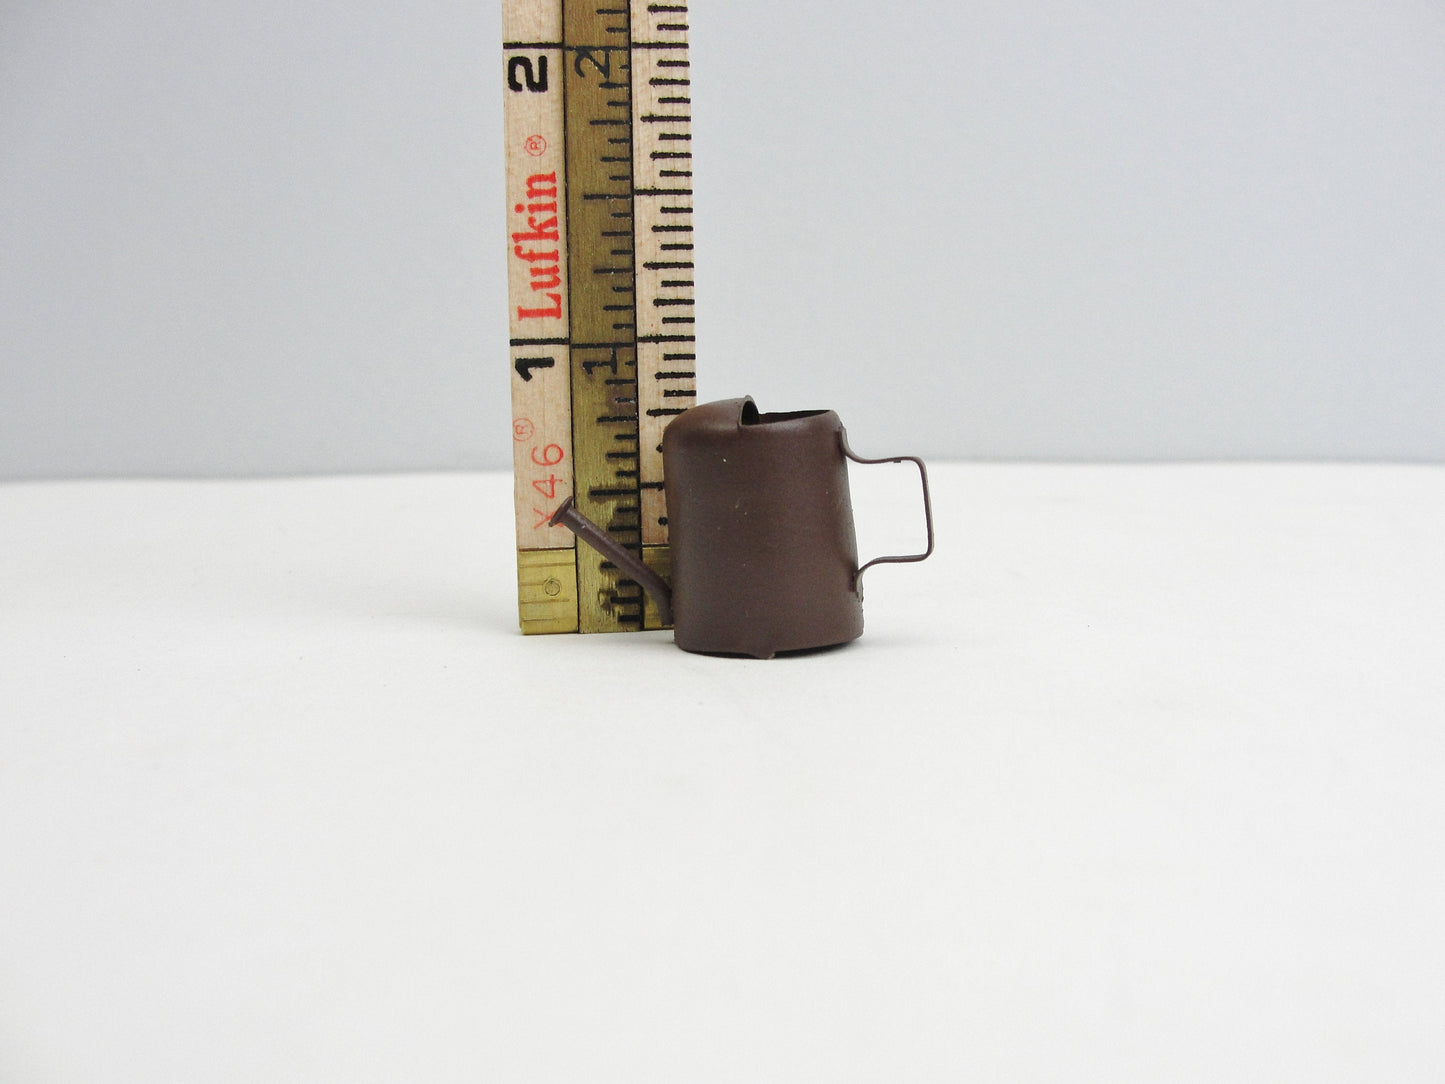 Miniature rust colored metal watering can